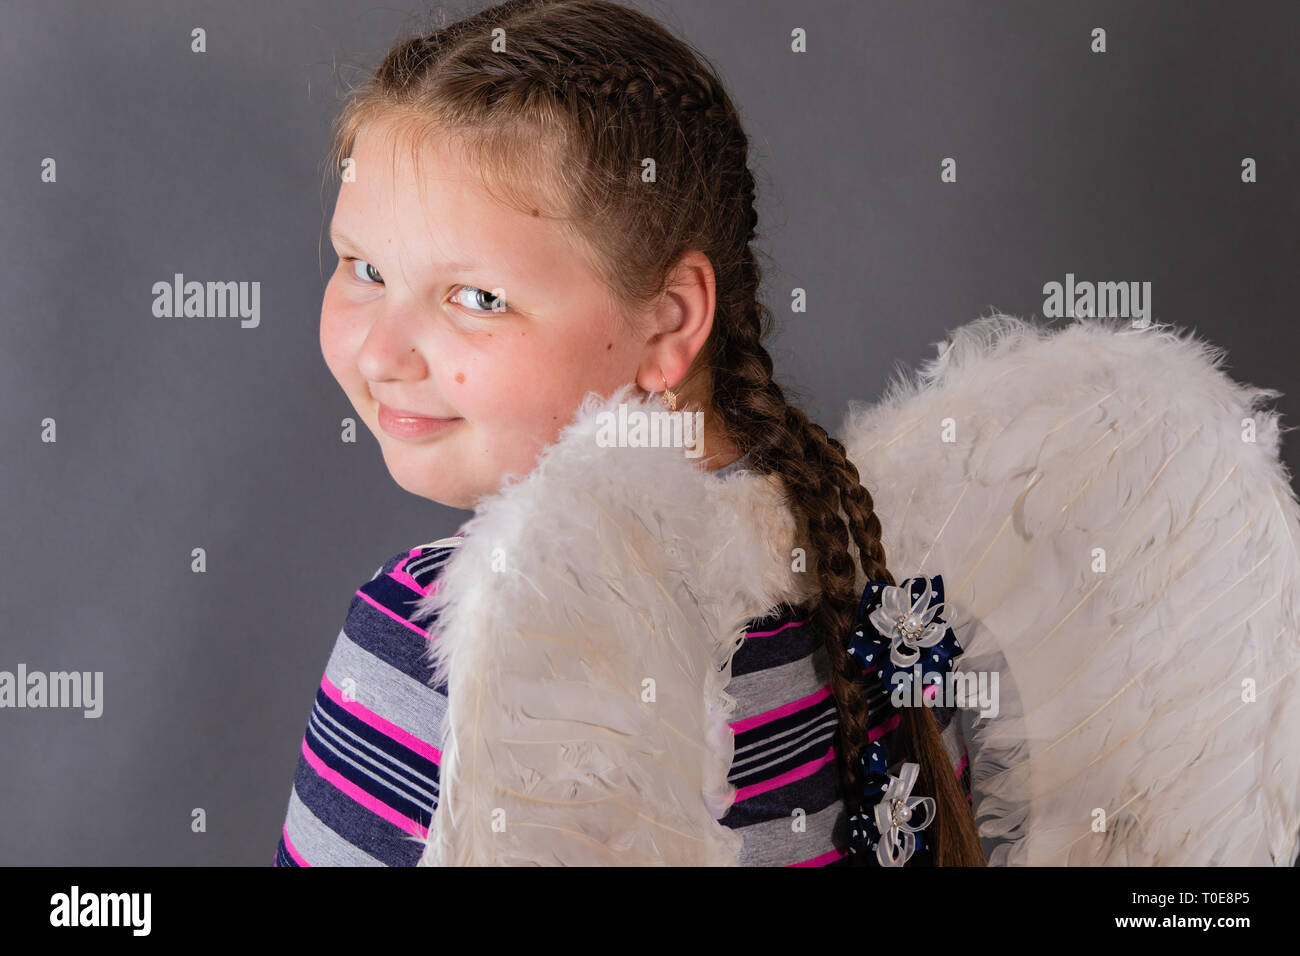 Strong stout smiling angel girl with wings. Stock Photo